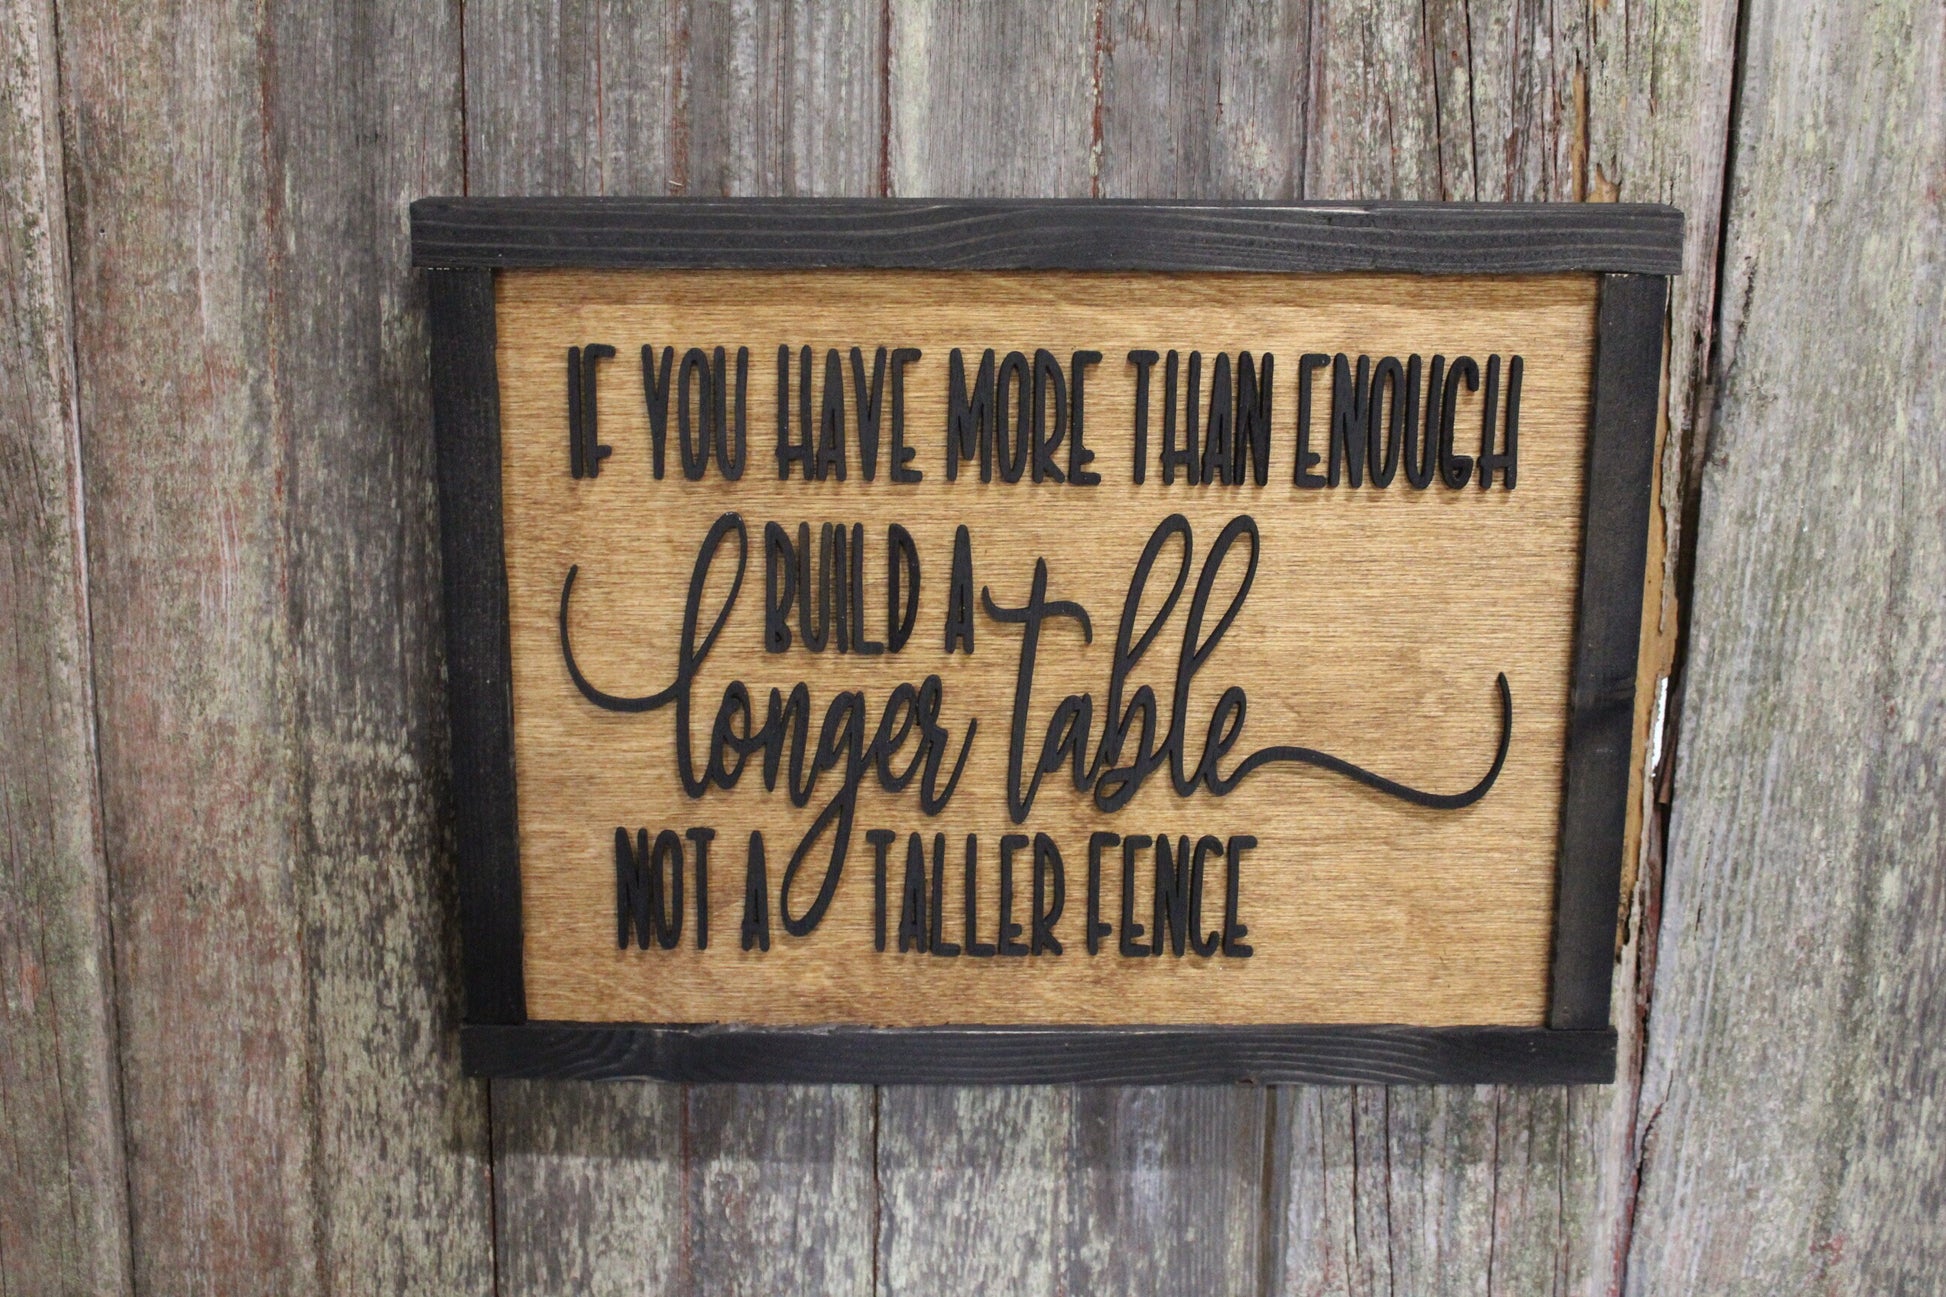 Build A Longer Table Not a Taller Fence Wood Sign Encouragement 3D Raised Text Country Farmhouse Cabin Decor Dining Room Compassion Family